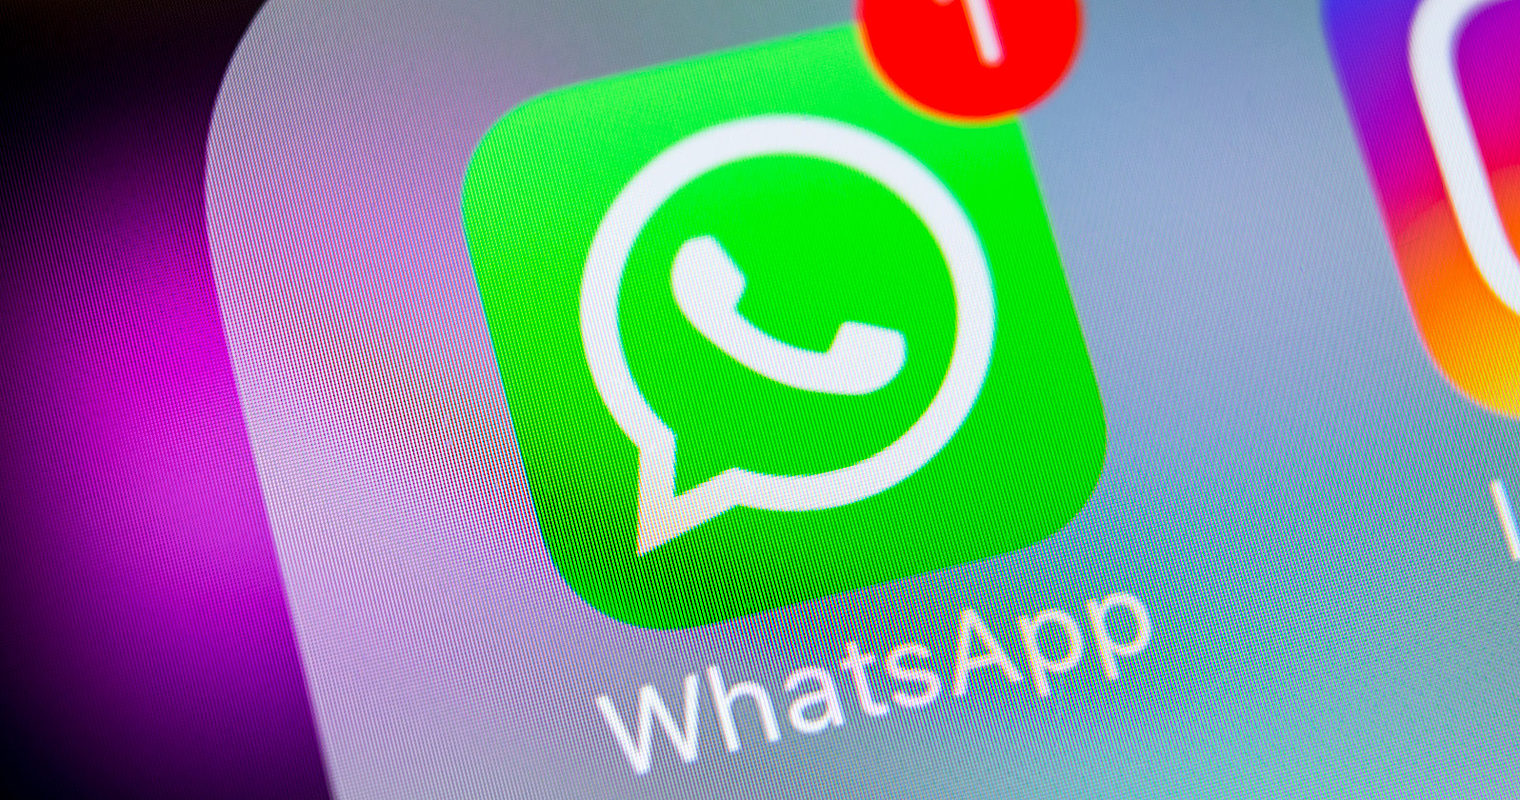 Google & Other Search Engines Found Indexing Links to Private WhatsApp Groups